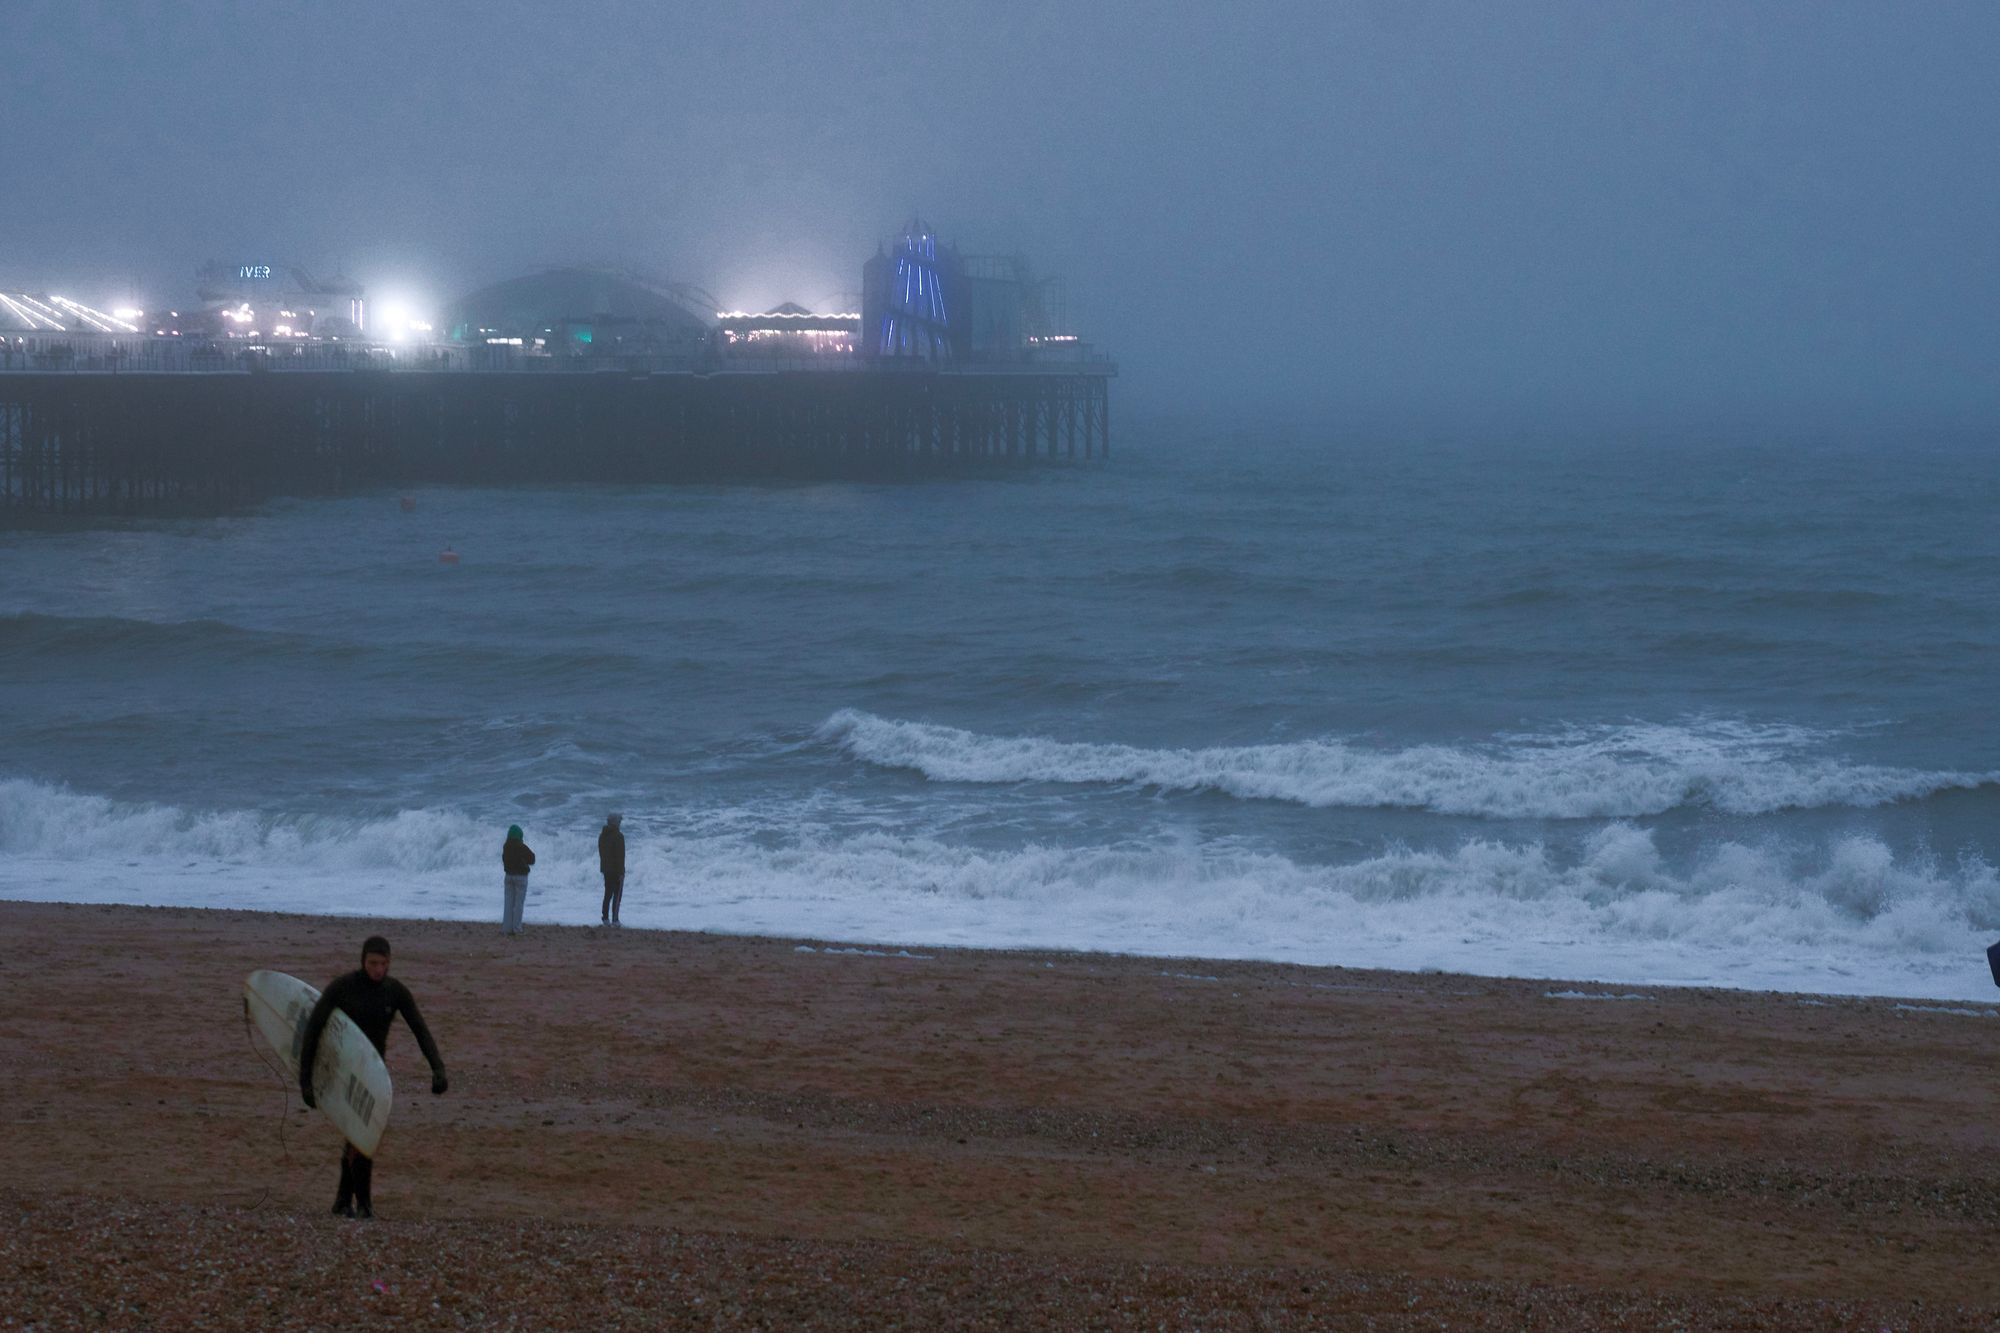 A choppy sea on a grey day, with Brighton Pier in the background. Two people stand on the brown shingle beach looking out to sea. A man in a wetsuit carrying a surfboard walks up the beach, looking astonishingly chilly.